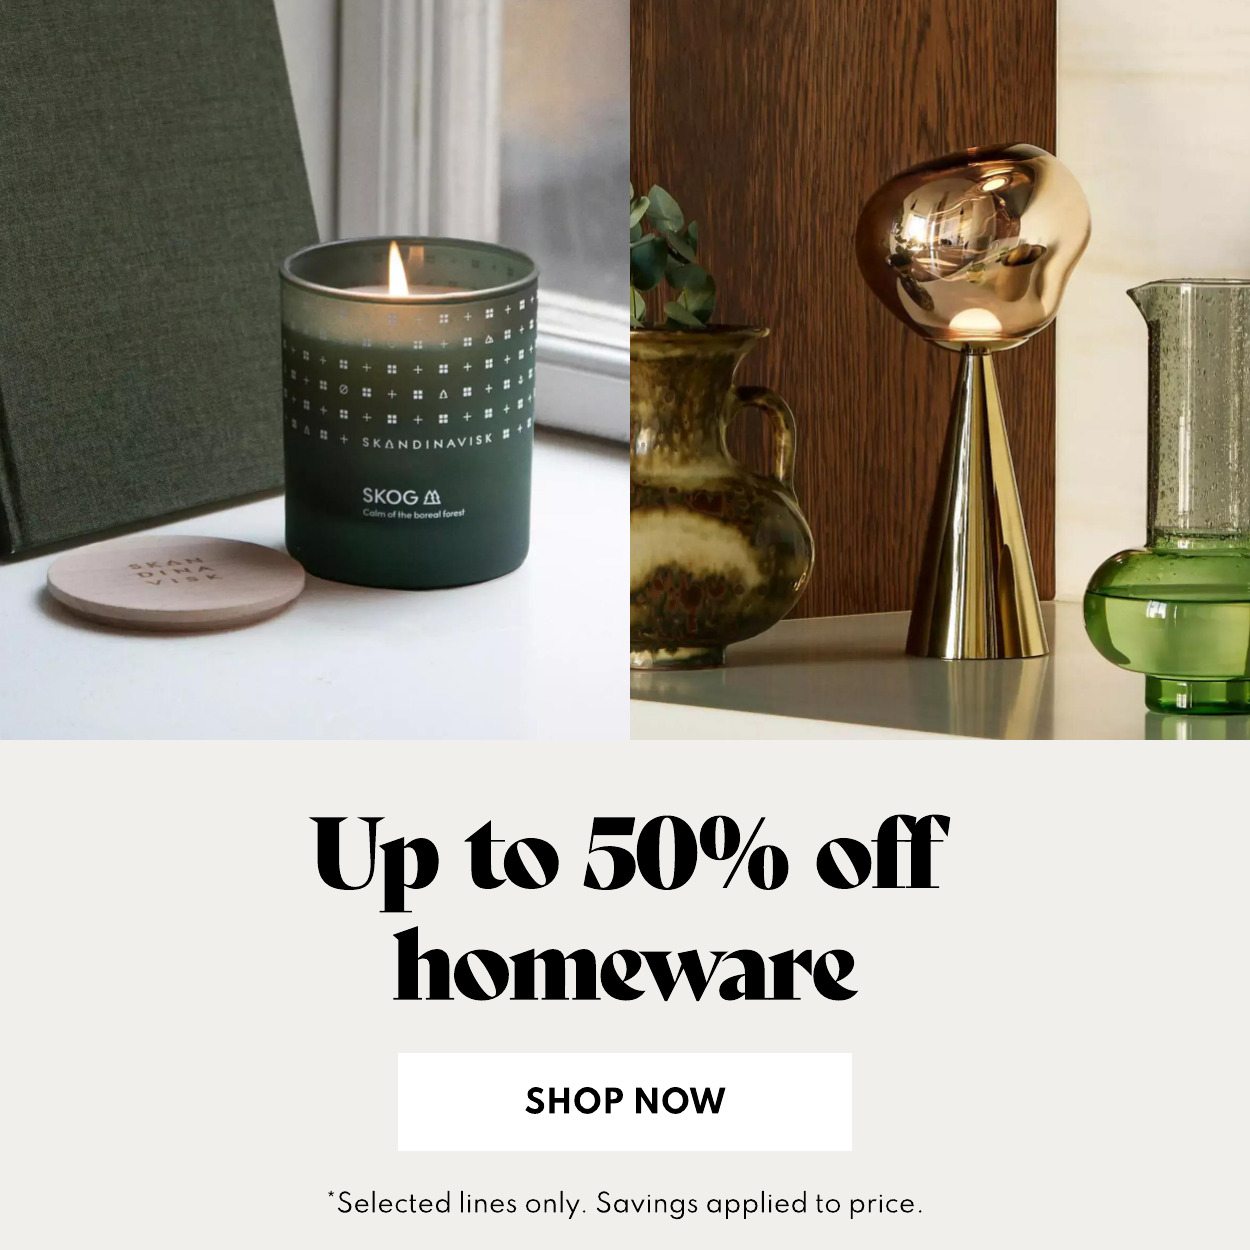 Up to 50% off homeware